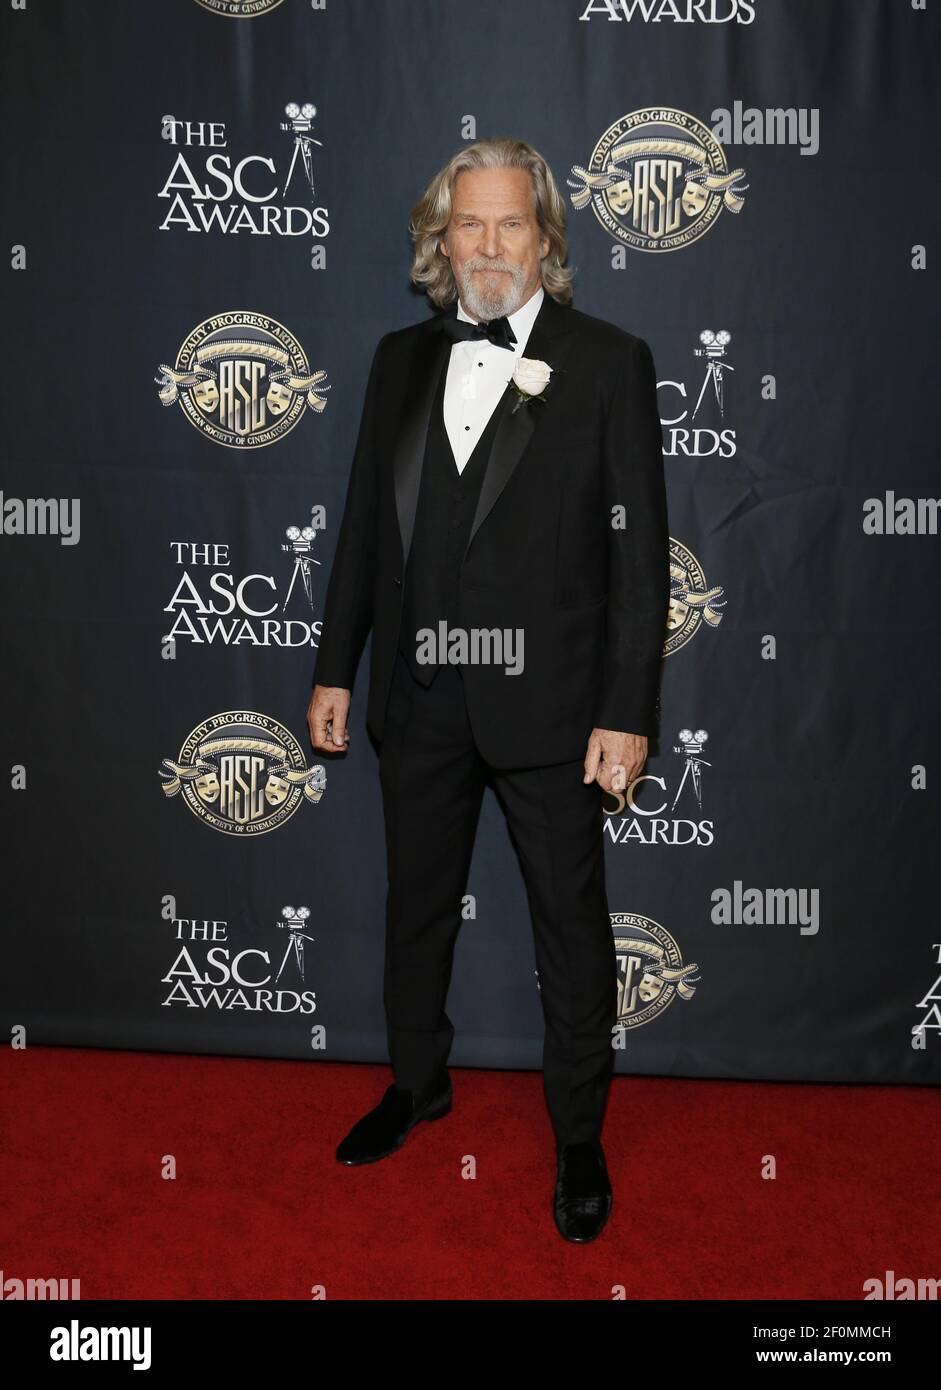 ASC Board of Governors Award honoree Jeff Bridges poses at the 33rd annual ASC Awards and The American Society of Cinematographers 100th Anniversary Celebration at the Ray Dolby Ballroom at Hollywood & Highland, Saturday, February 9, 2019 in Hollywood, California. (Photo by Danny Moloshok/imageSPACE / SIPA USA) Stock Photo